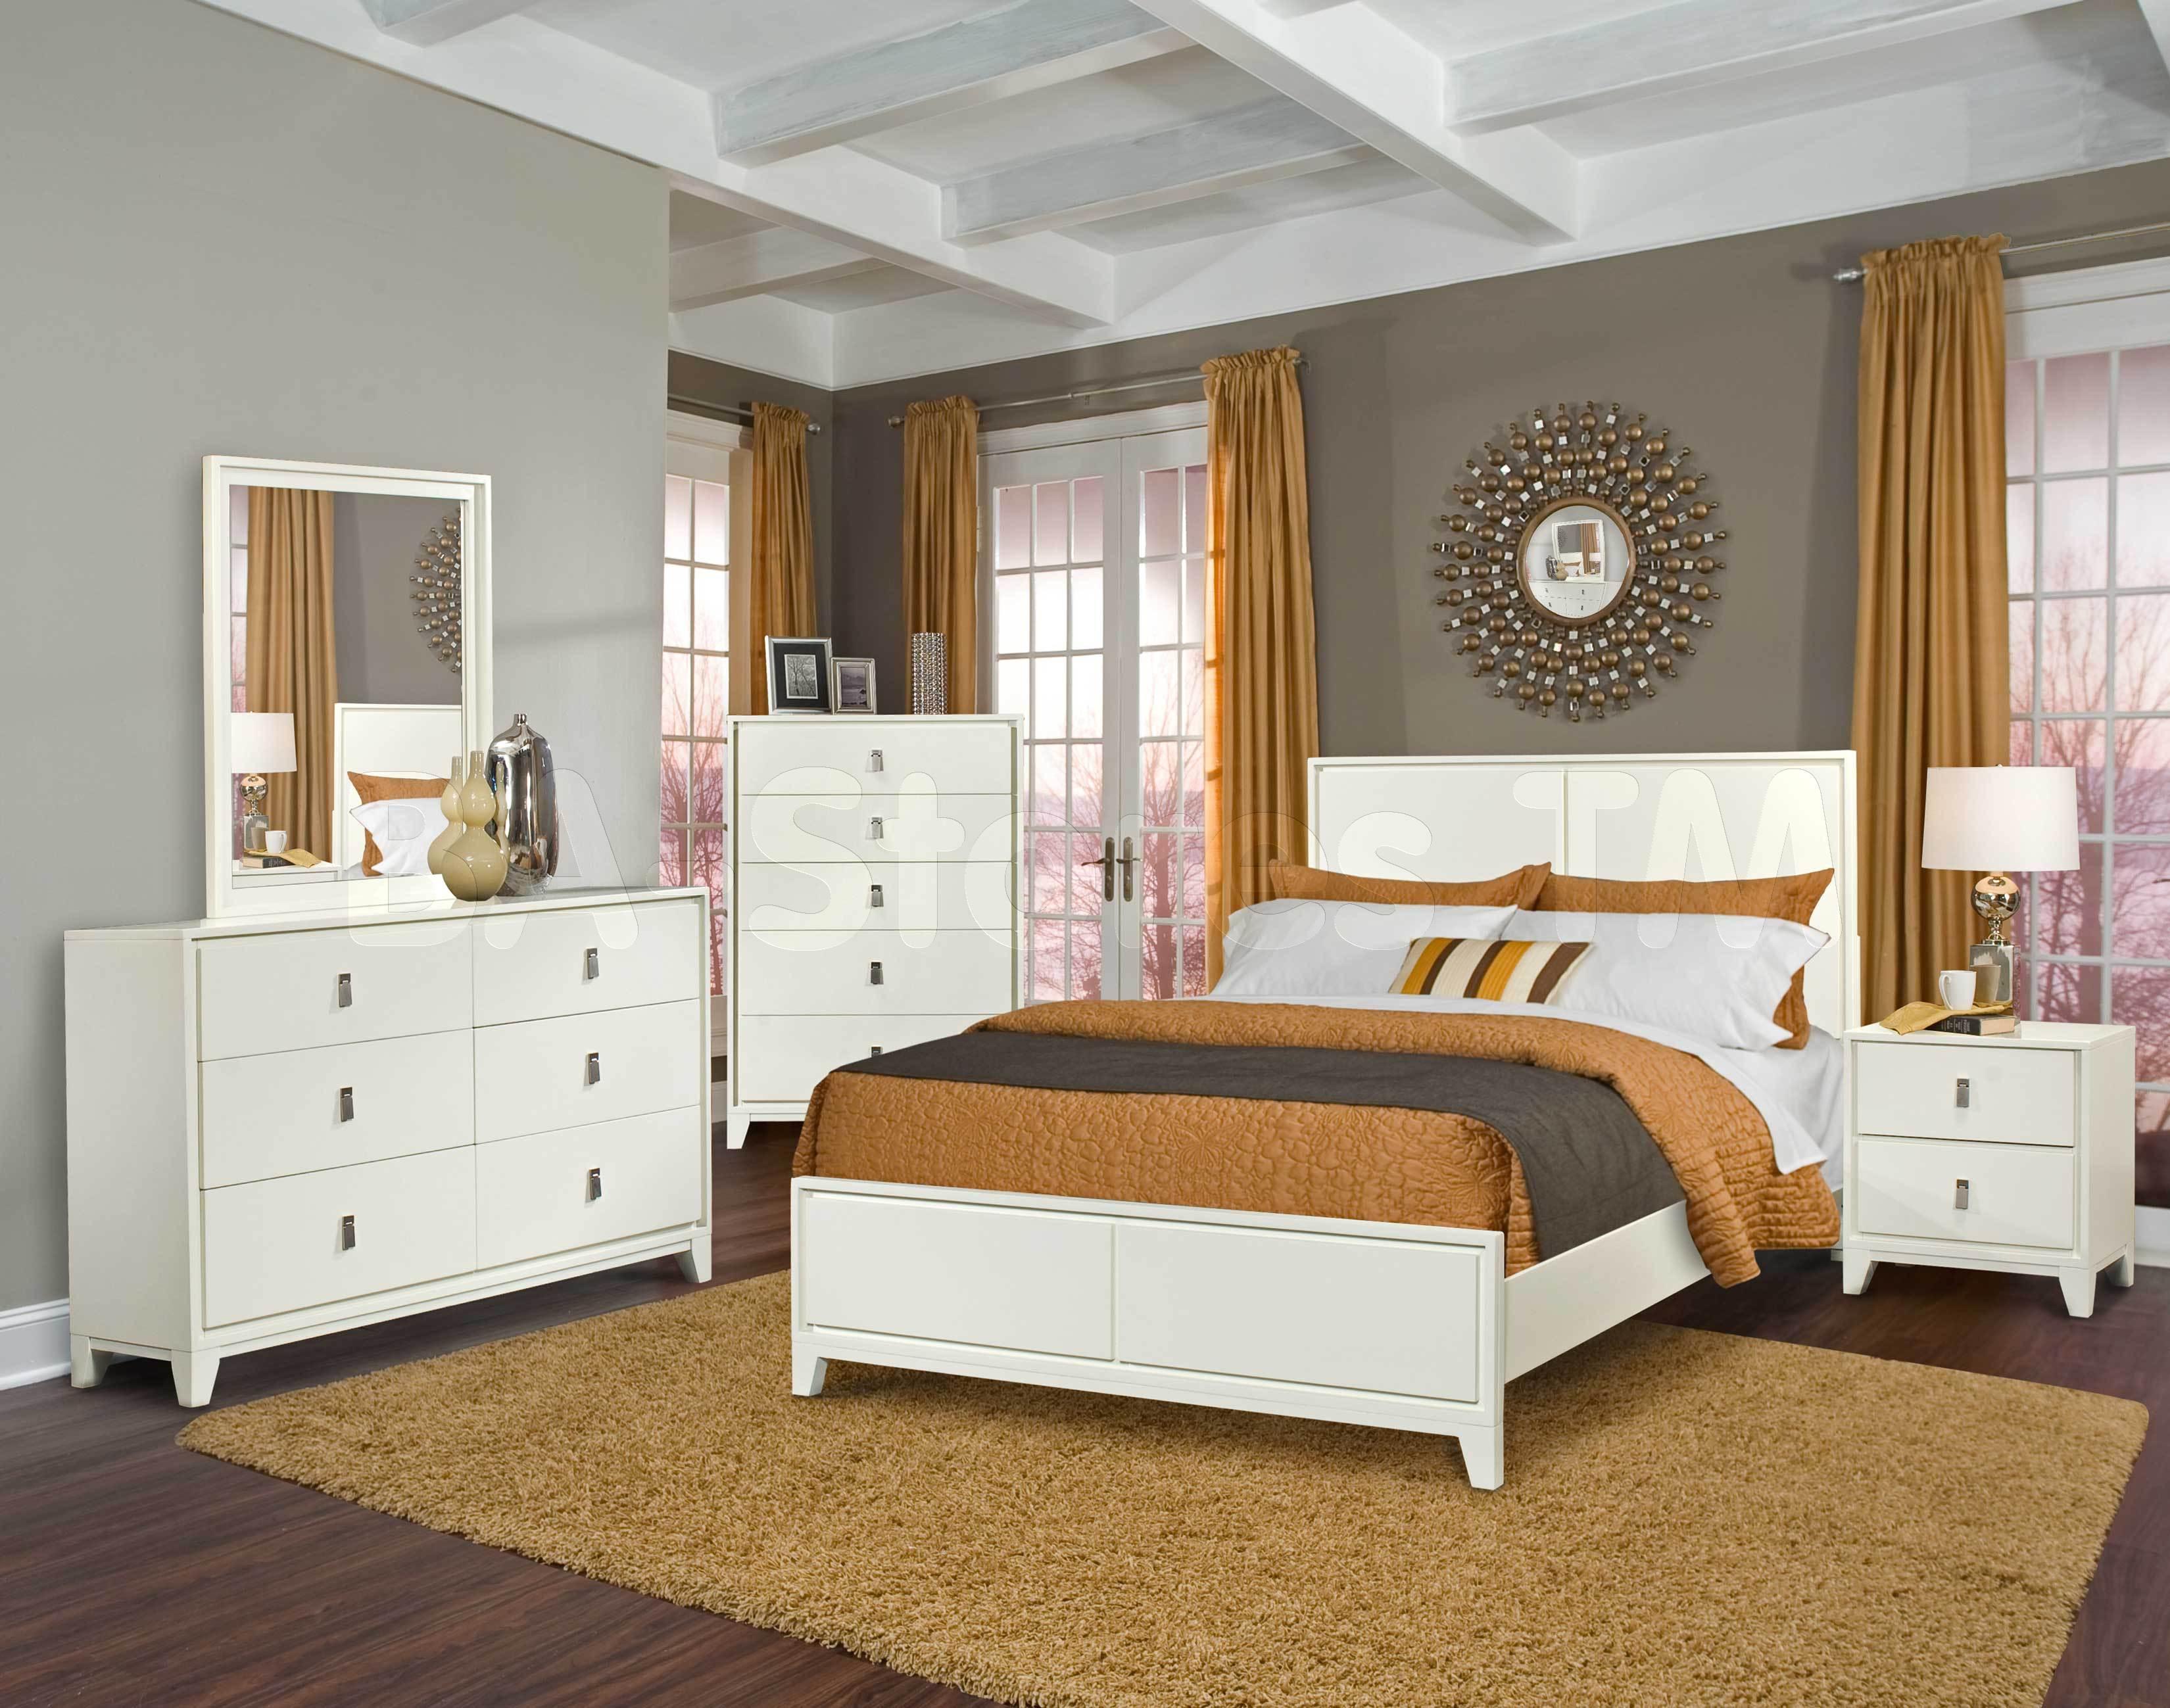 17 Timeless Bedroom Designs With Wooden, Bedroom Colour Ideas With Wooden Furniture